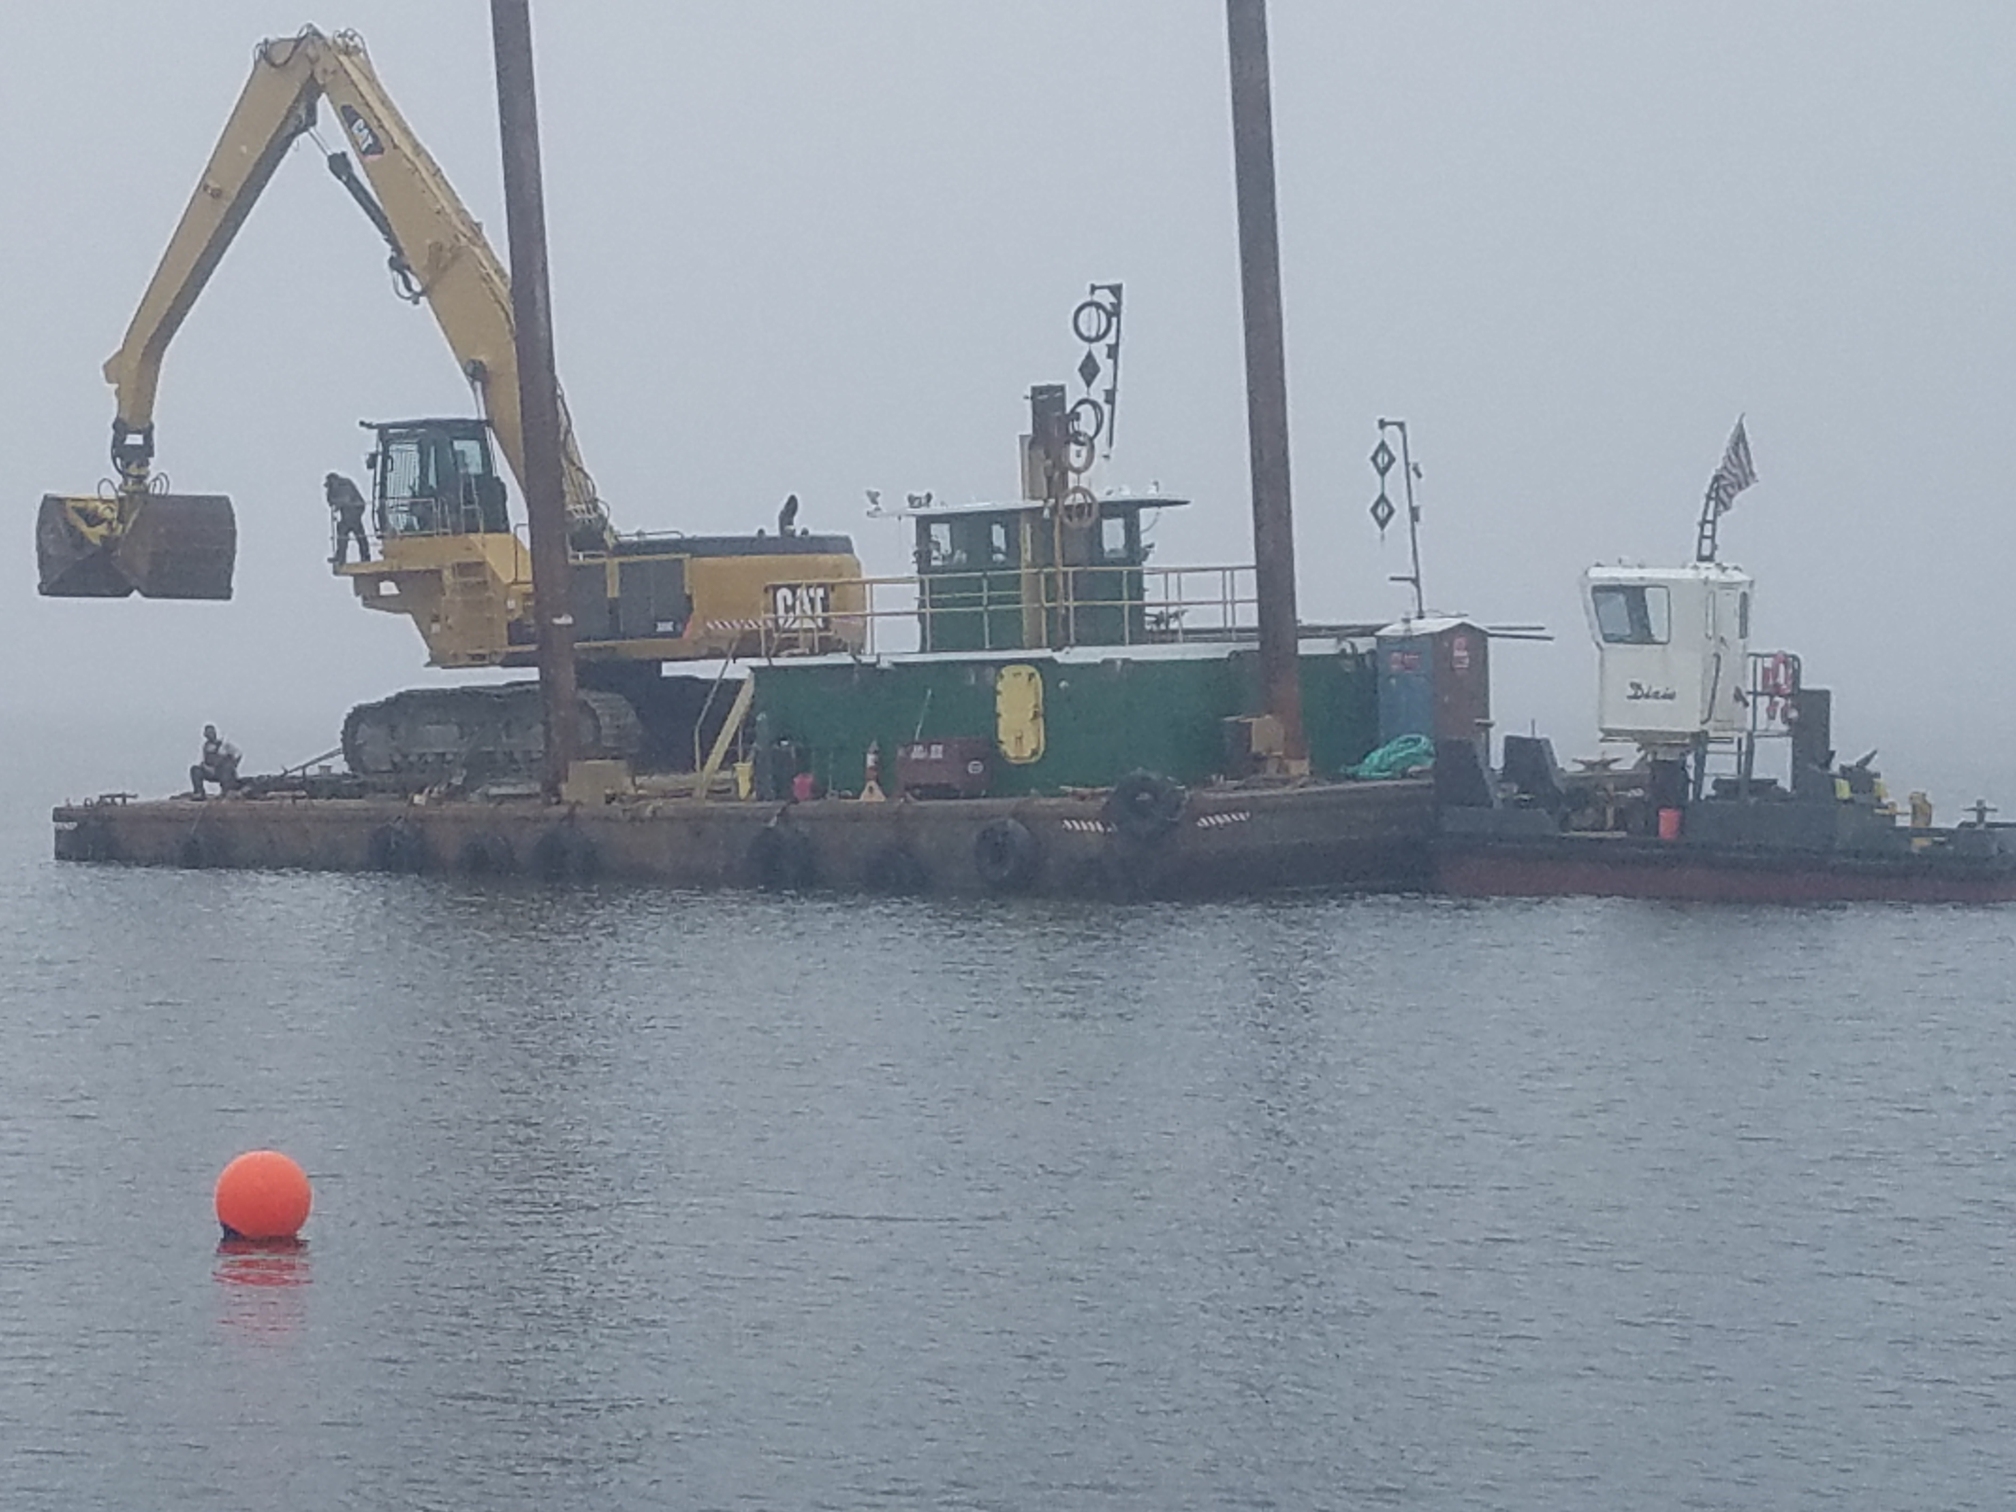 A barge off Bayview Park in Brick, June 19, 2019, as part of a regional dredging project. (Photo: Patricia Nee)